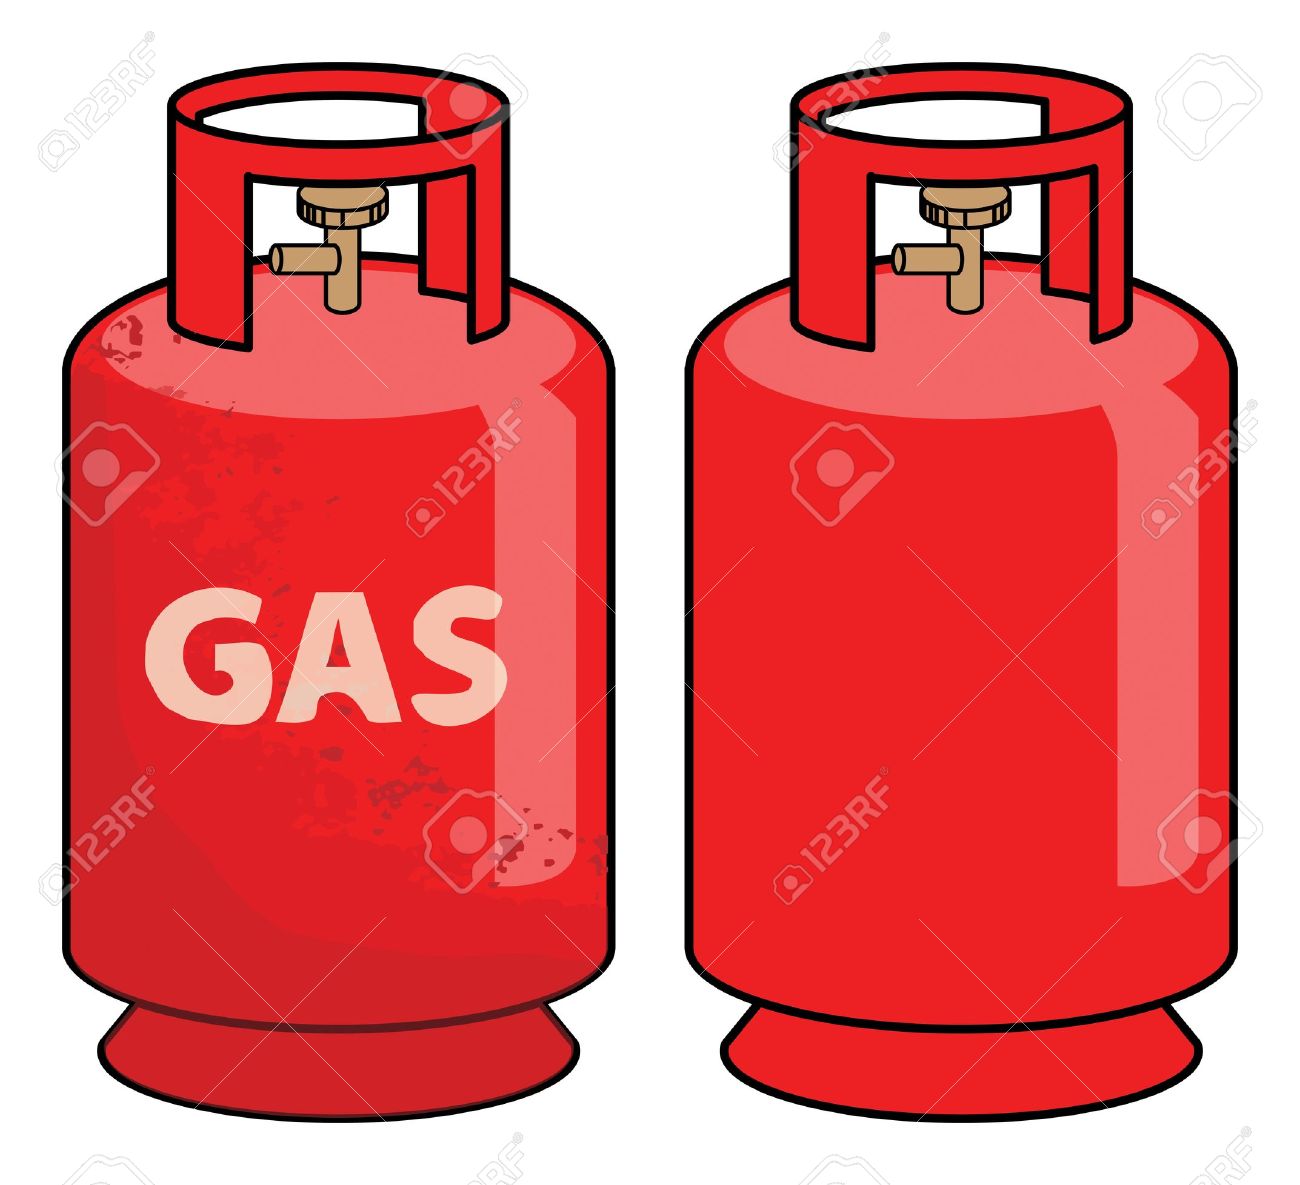 Gas clipart - Clipground